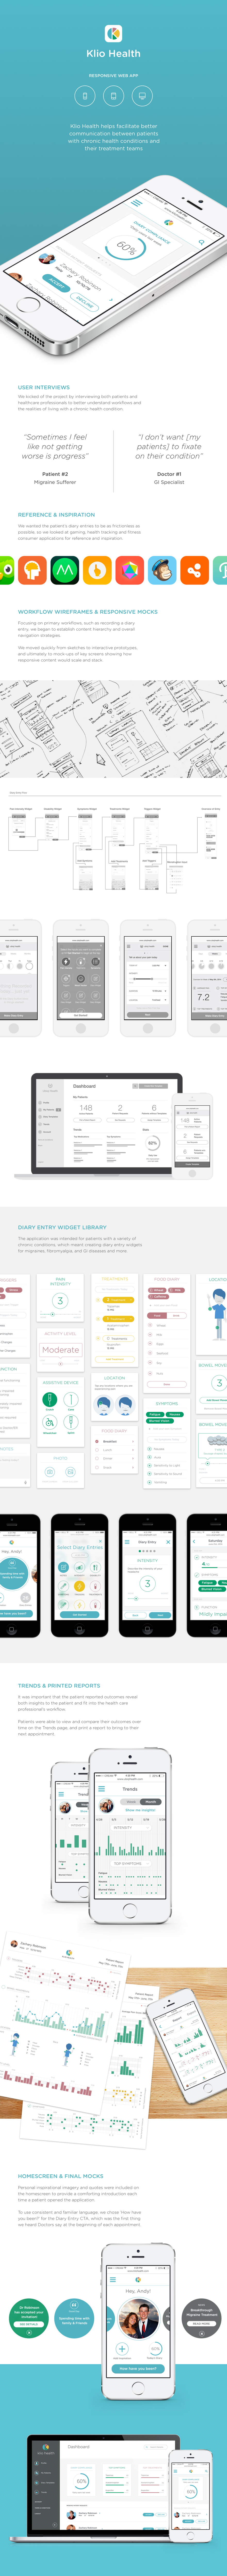 healthcare mobile doctor patient Diary report Responsive web app